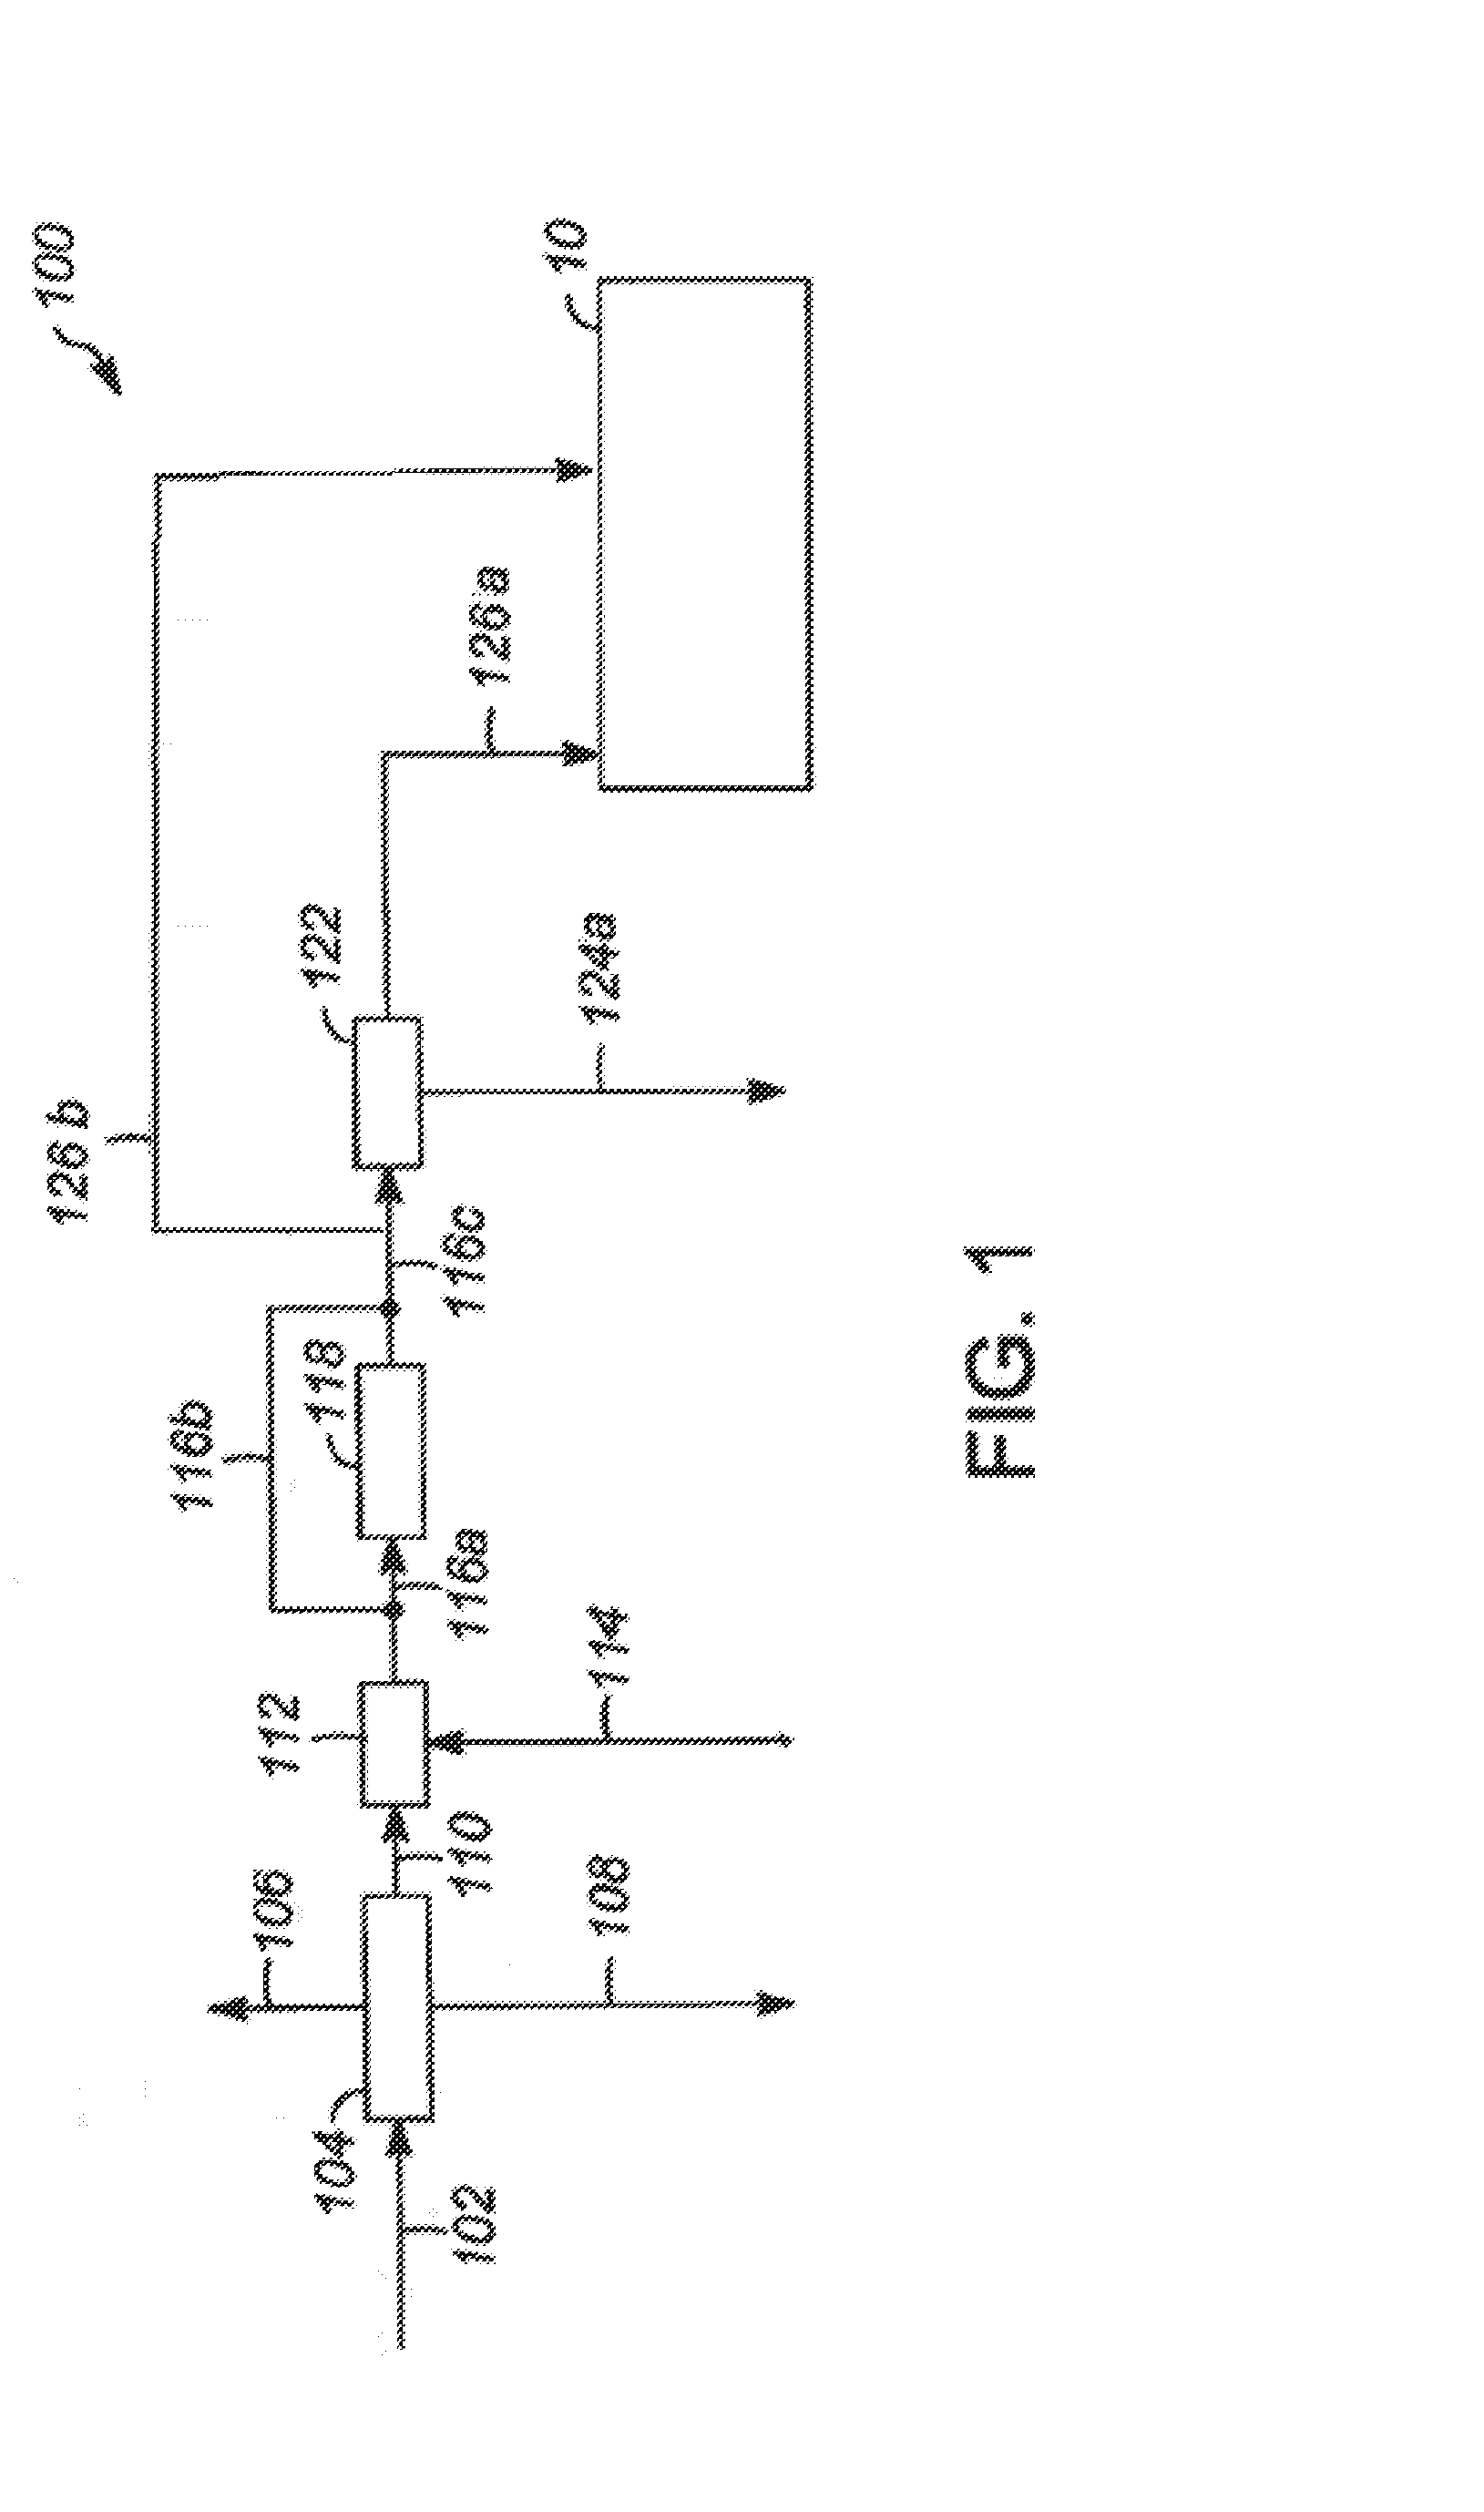 Methods for producing alkylbenzenes, paraffins, olefins and oxo alcohols from waste plastic feedstocks